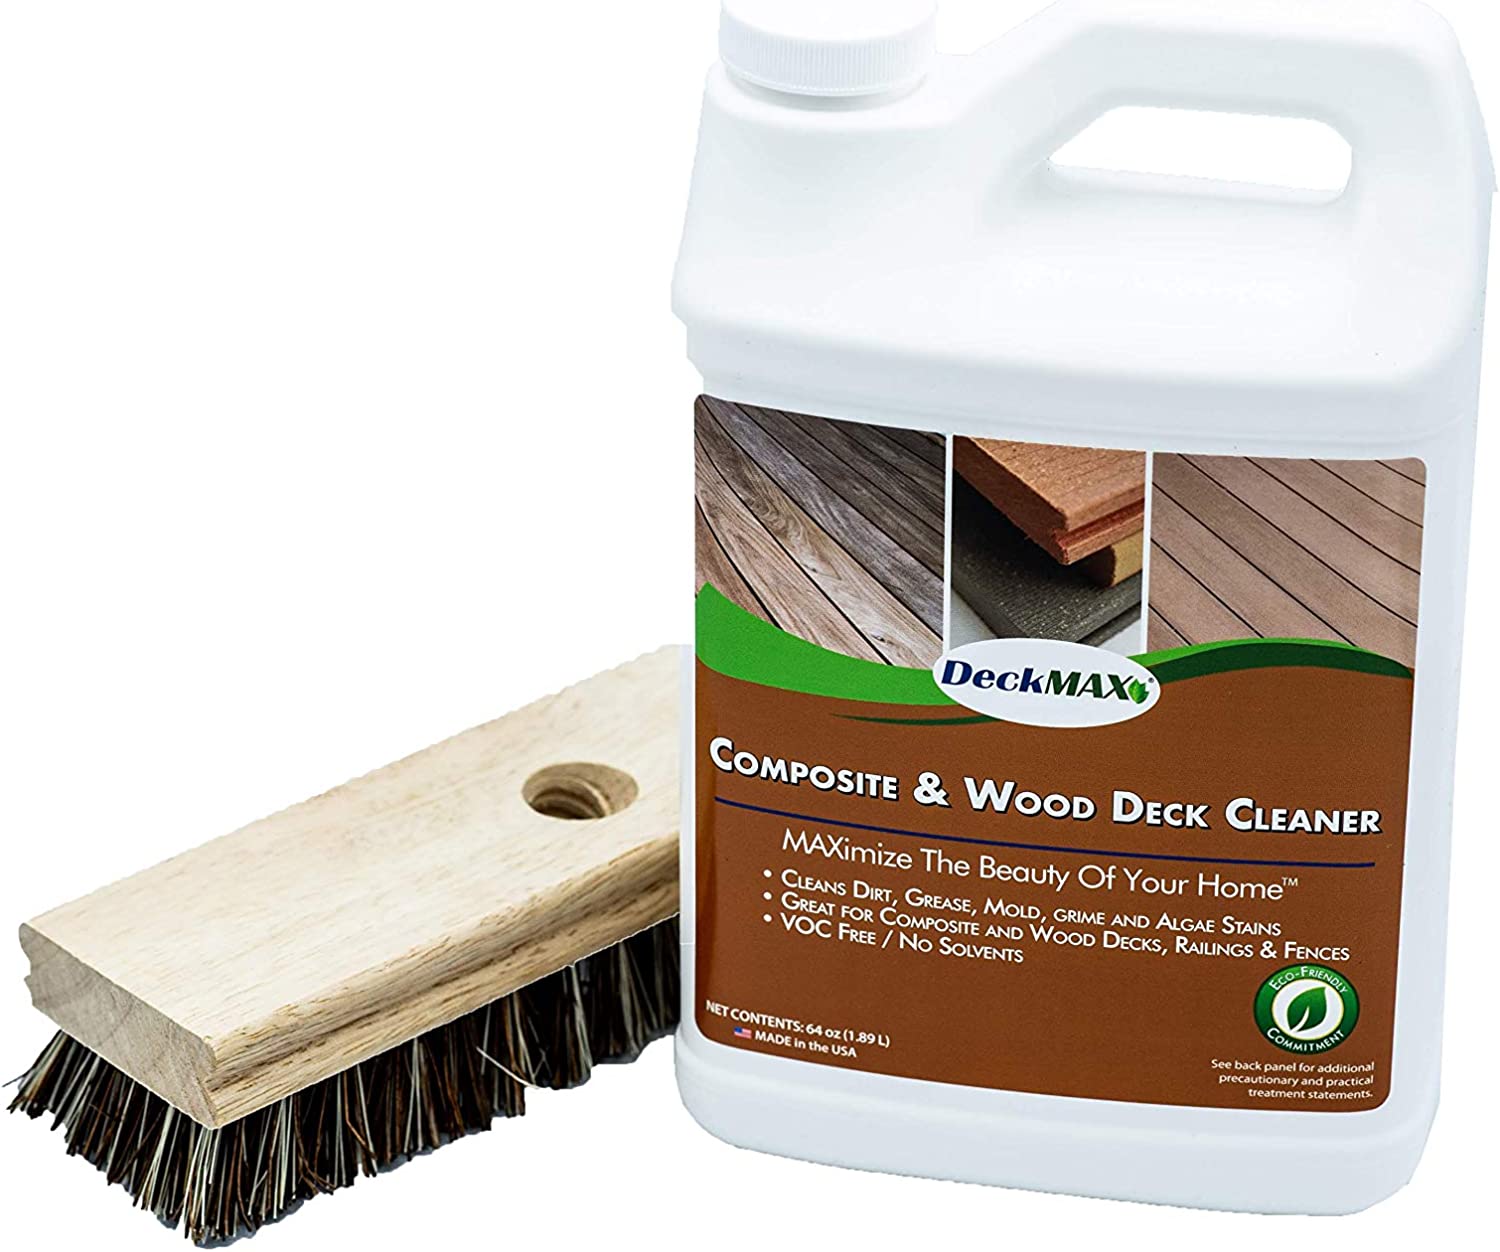 DeckMAX Concentrated Composite & Wood Deck Cleaner Kit [...]